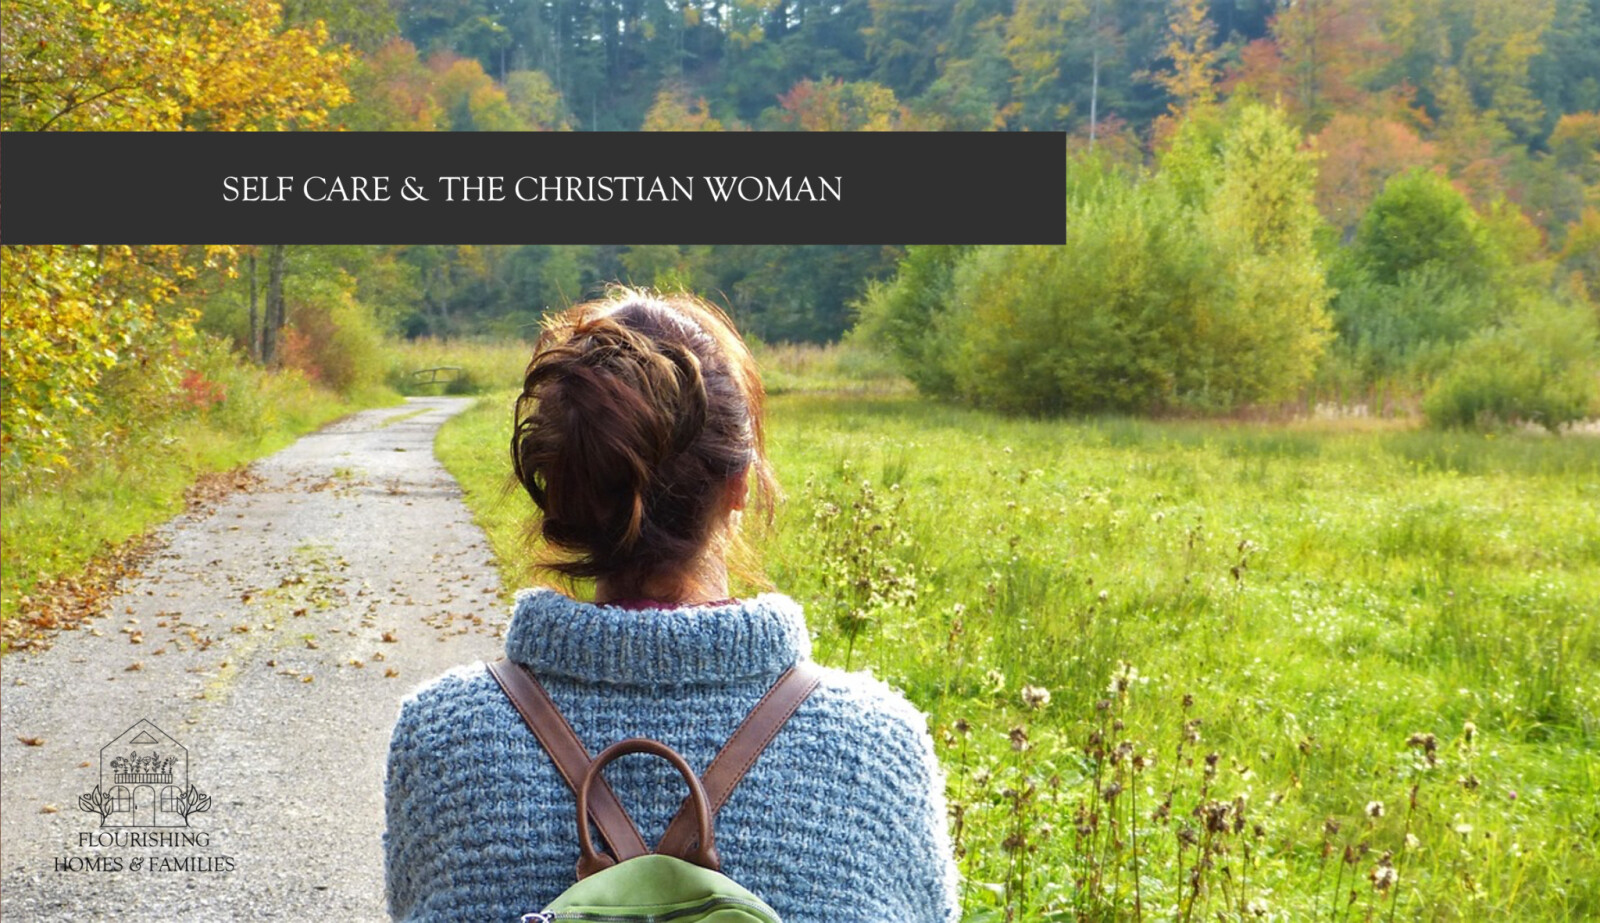 SELF CARE AND THE CHRISTIAN WOMAN